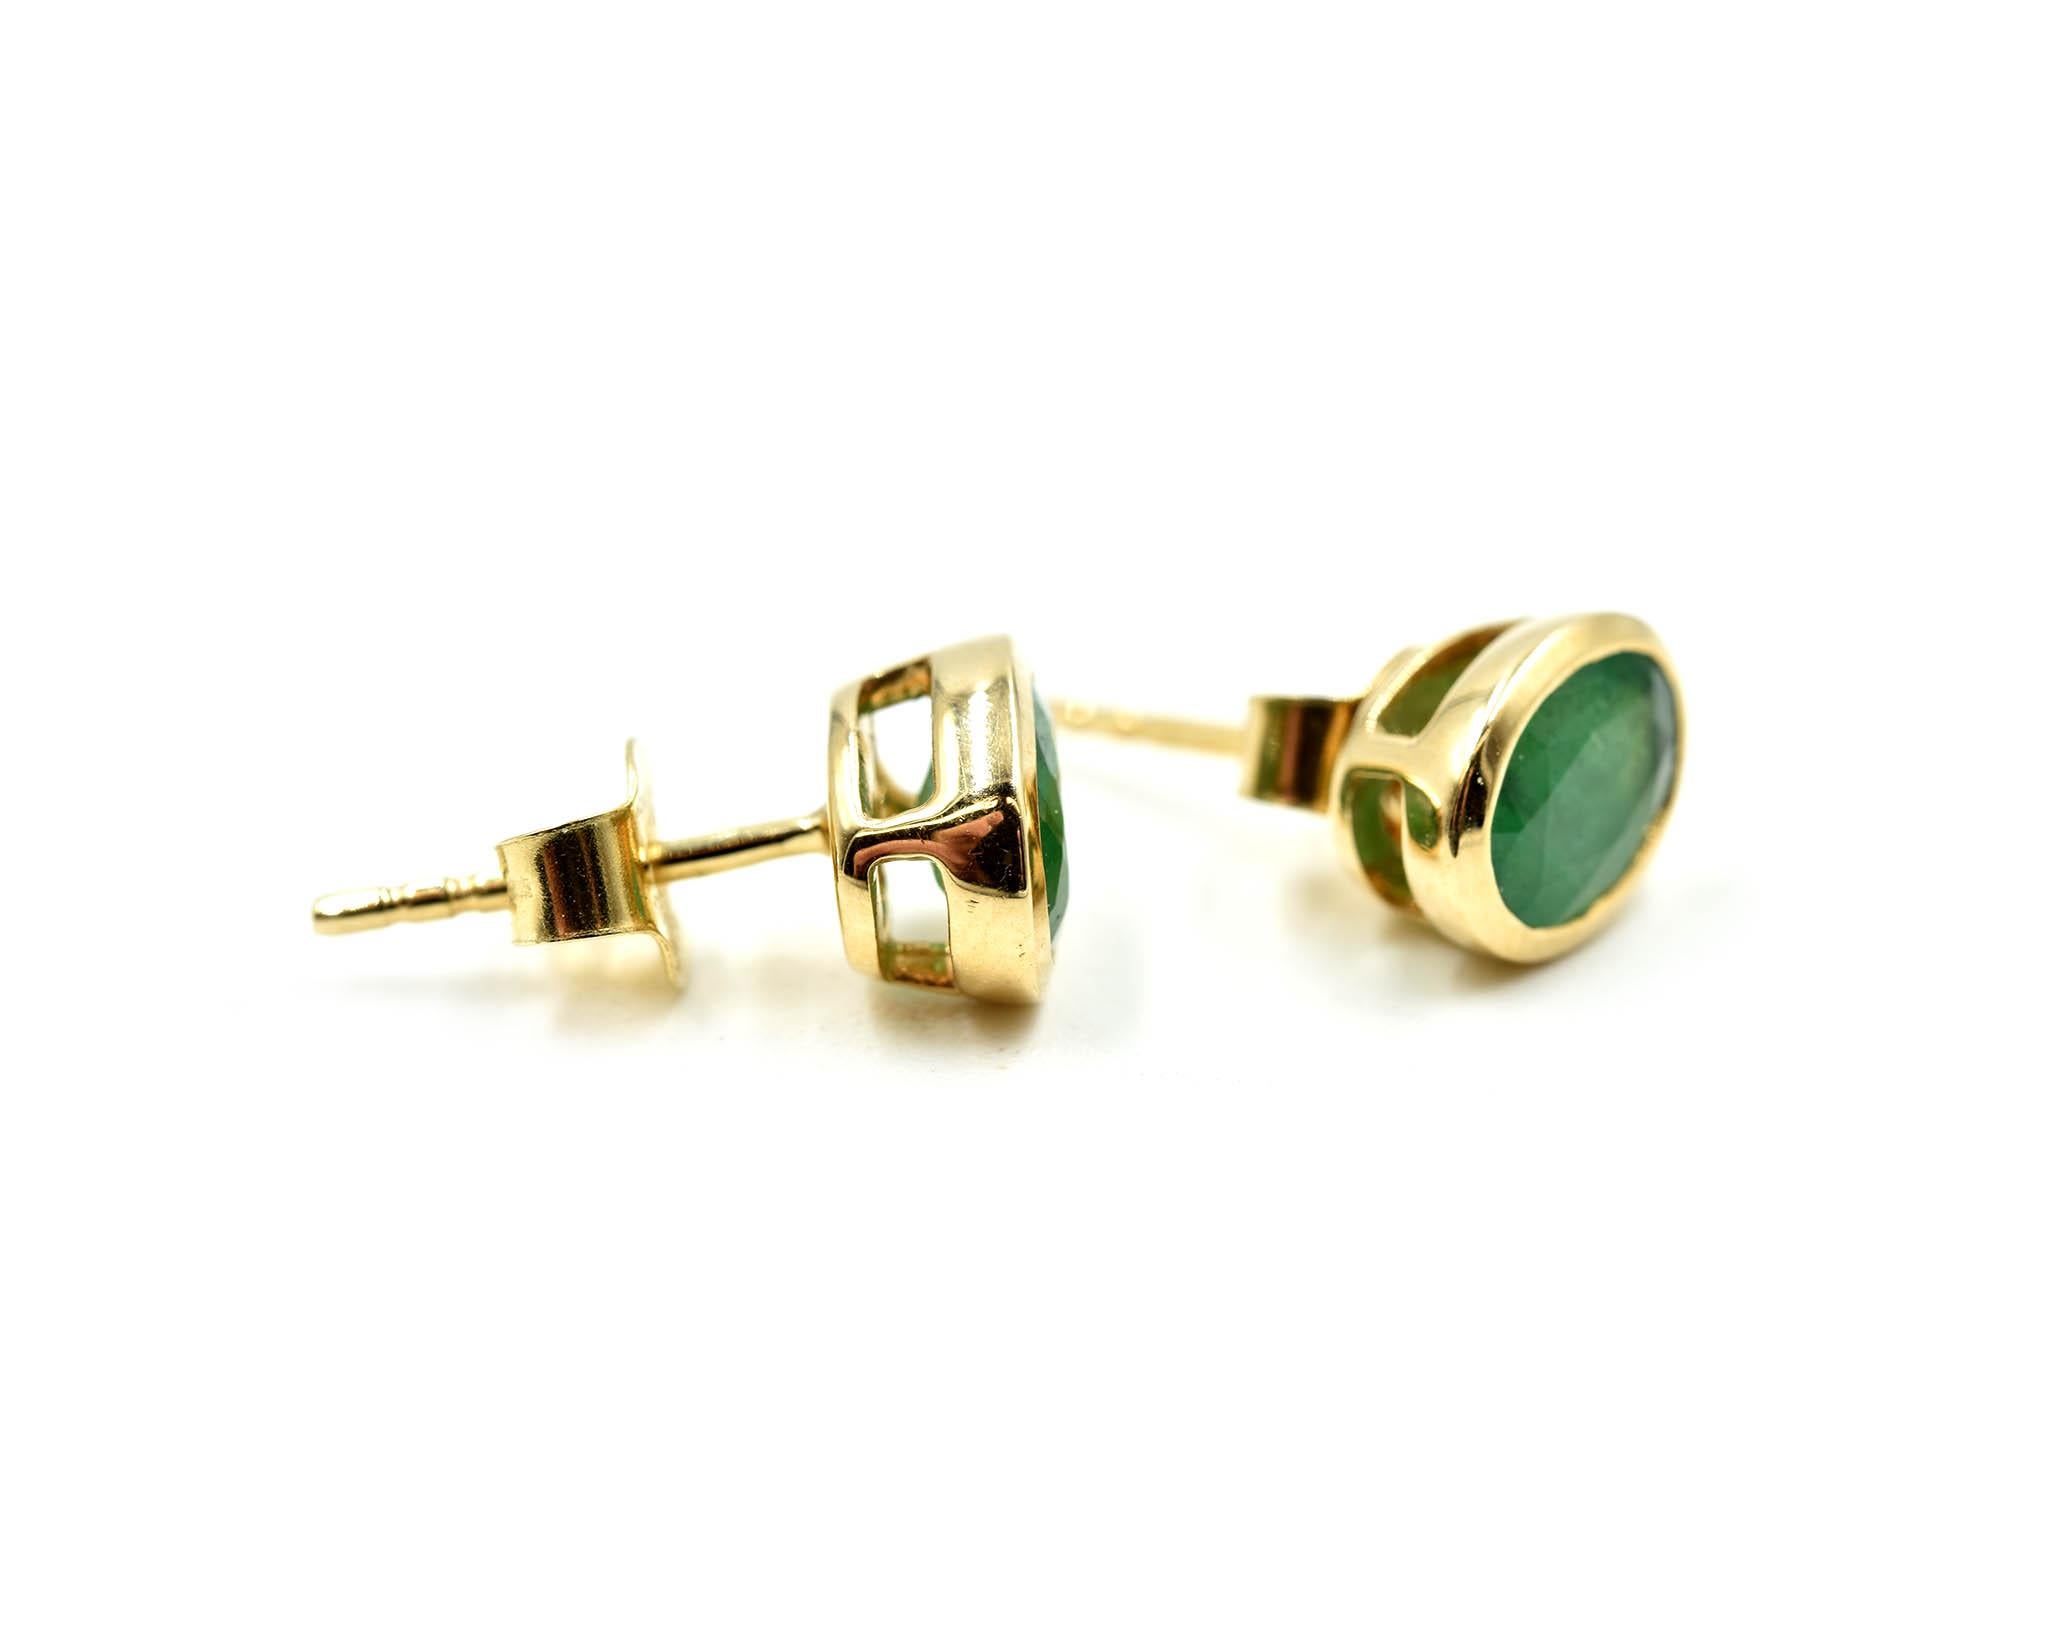 Designer: custom design
Material: 14k yellow gold
Emeralds: two oval cut emerald gemstones = 1.30 carat total weight
Dimensions: each earring measures 3/8 inches long and 1/4 inches wide 
Fastenings: friction backs
Weight: 2.20 grams
